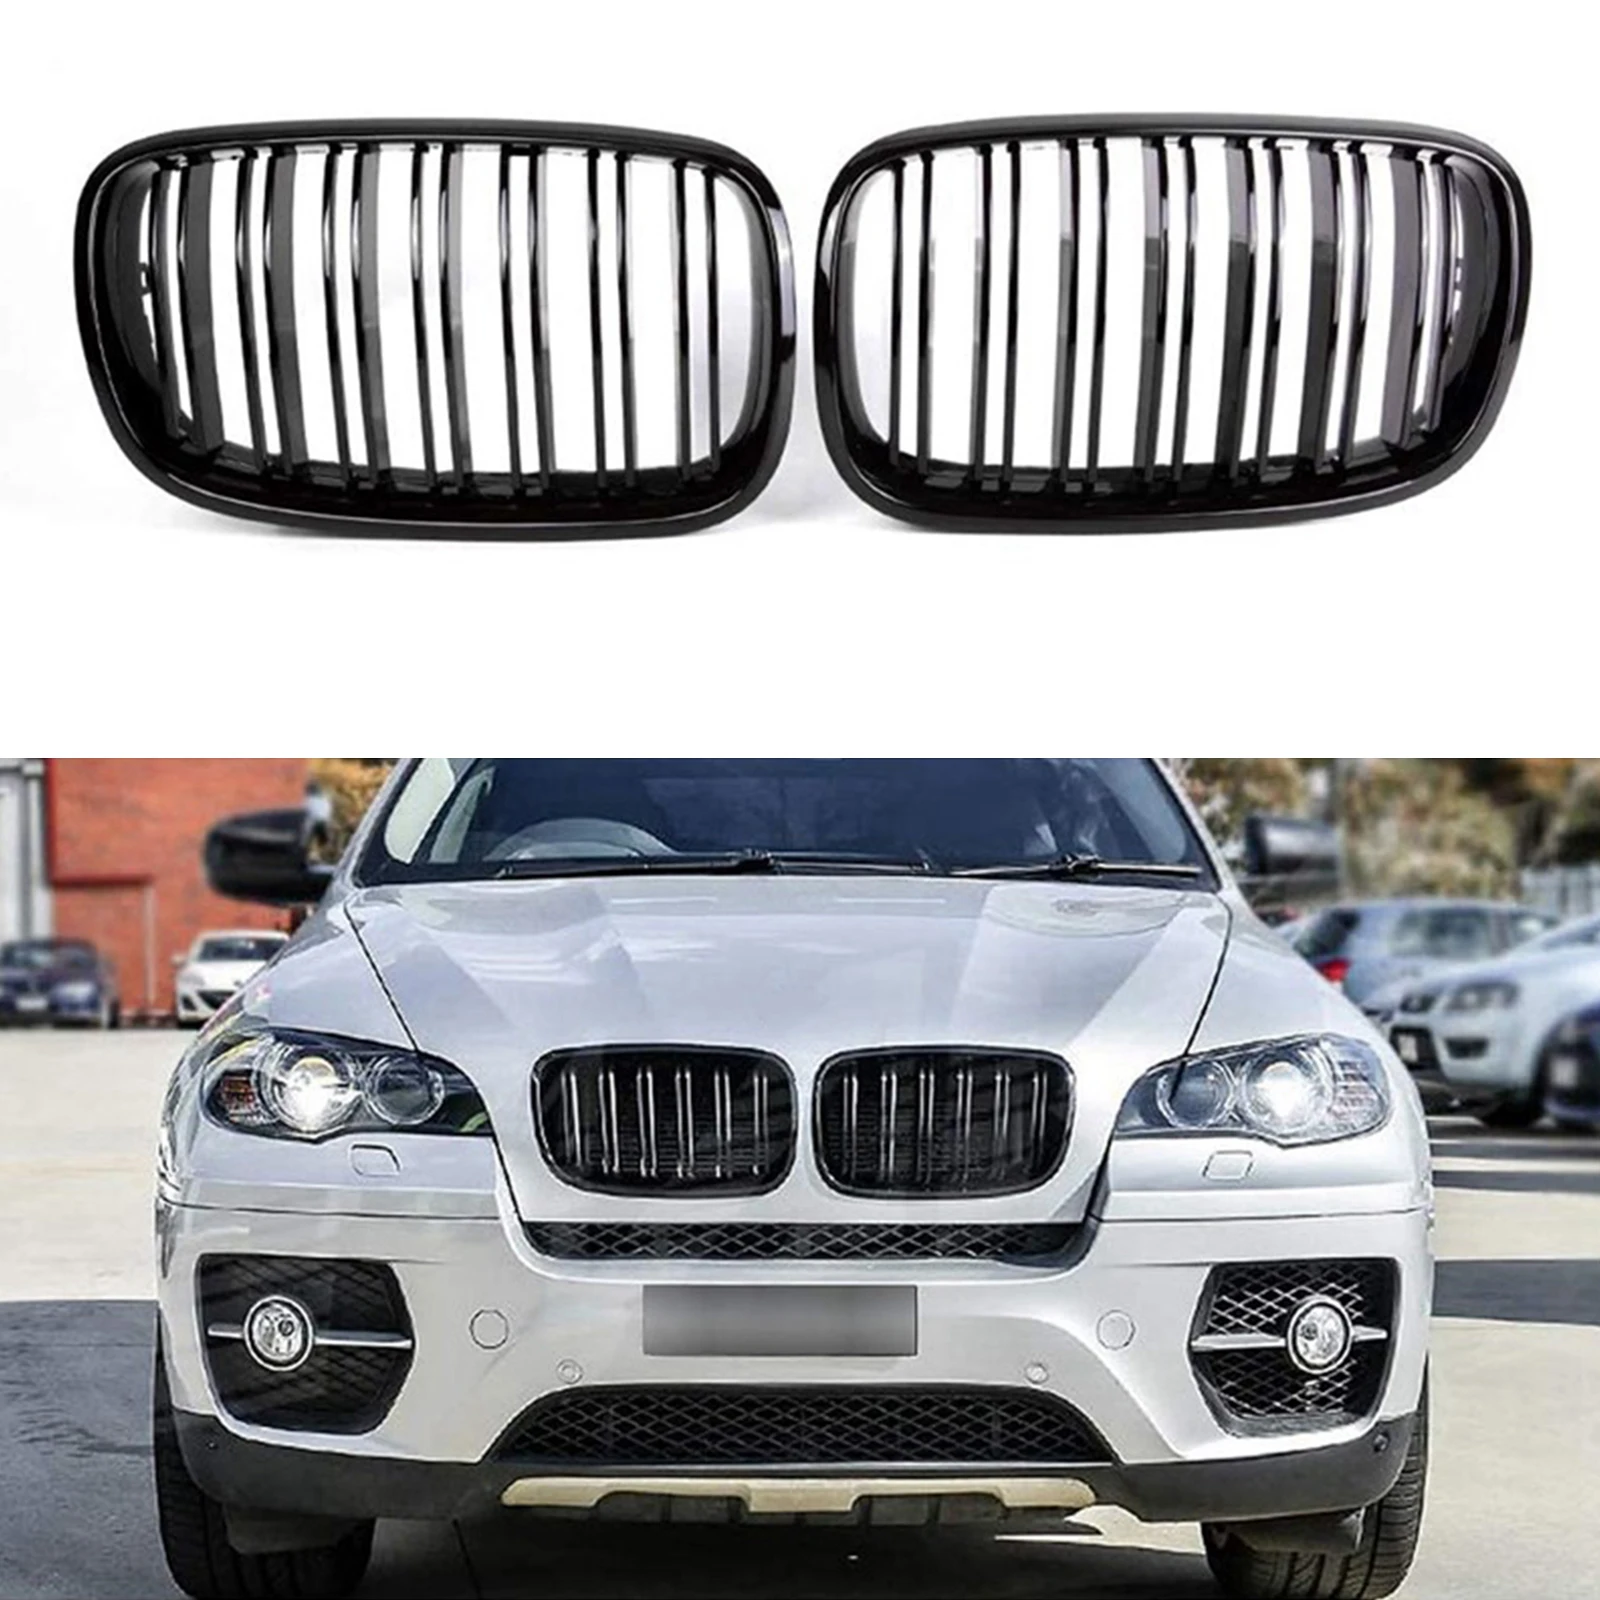 Black Front Kidney Double Line Grill Grille for BMW X5 E70 E71 2007 2008 2009 2010 2011 2012 2013, ABS Gloss Black Grill Set